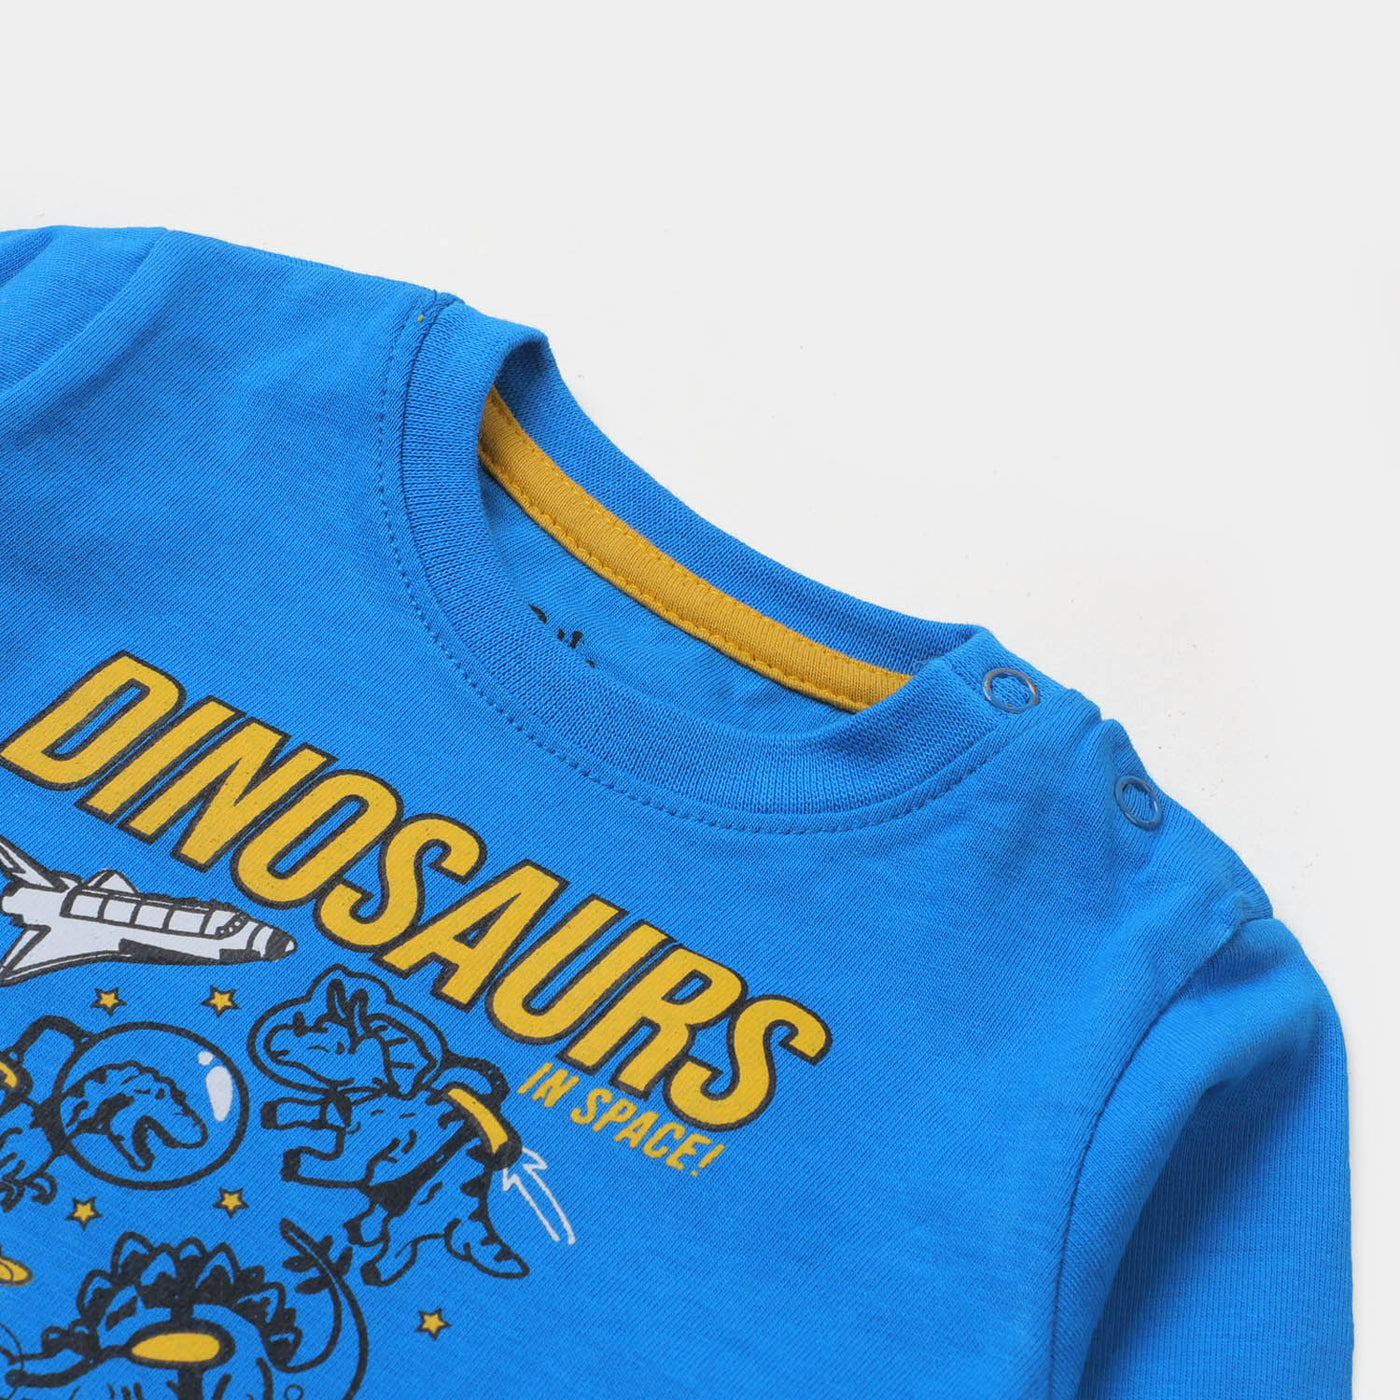 infant Boys T-Shirt Dino In Space - Blue Aster